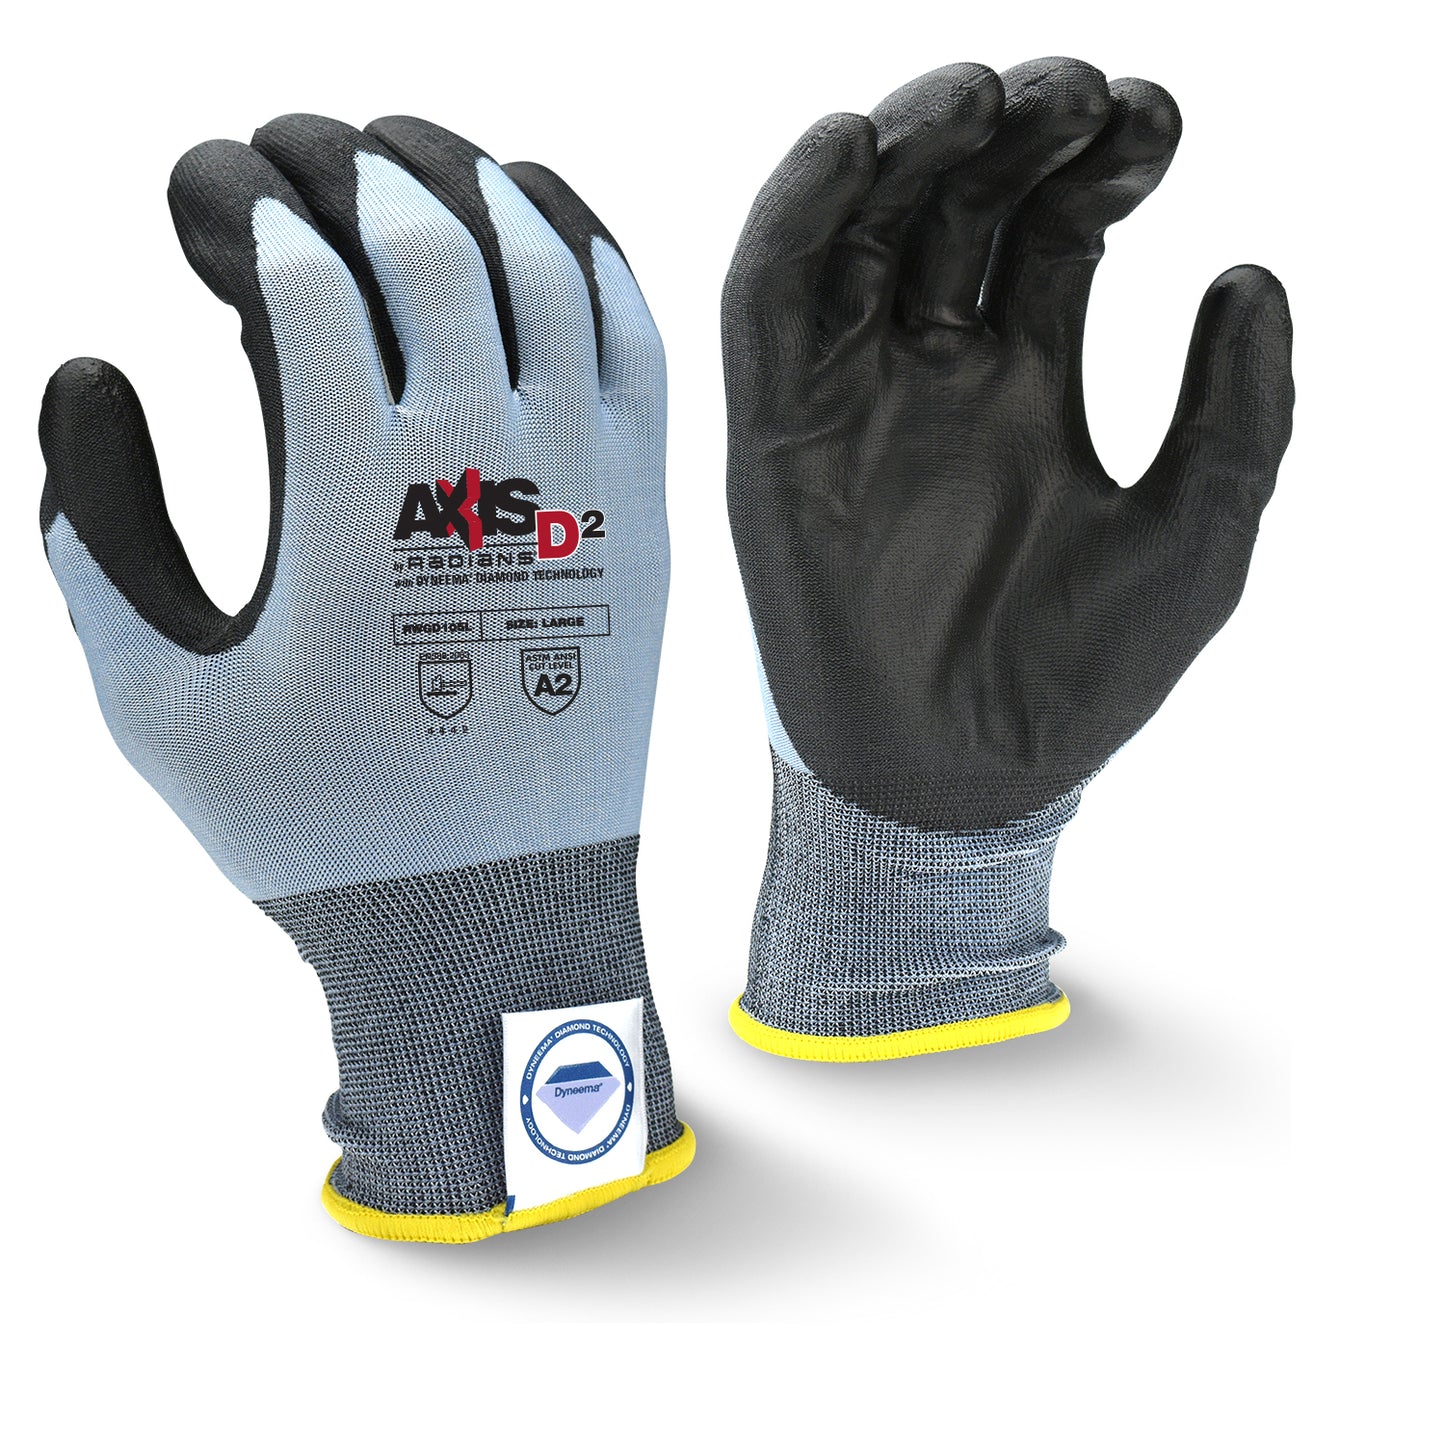 RADIANS RWGD105 AXIS D2™CUT PROTECTION LEVEL A2 GLOVE WITH DYNEEMA® DIAMOND TECHNOLOGY